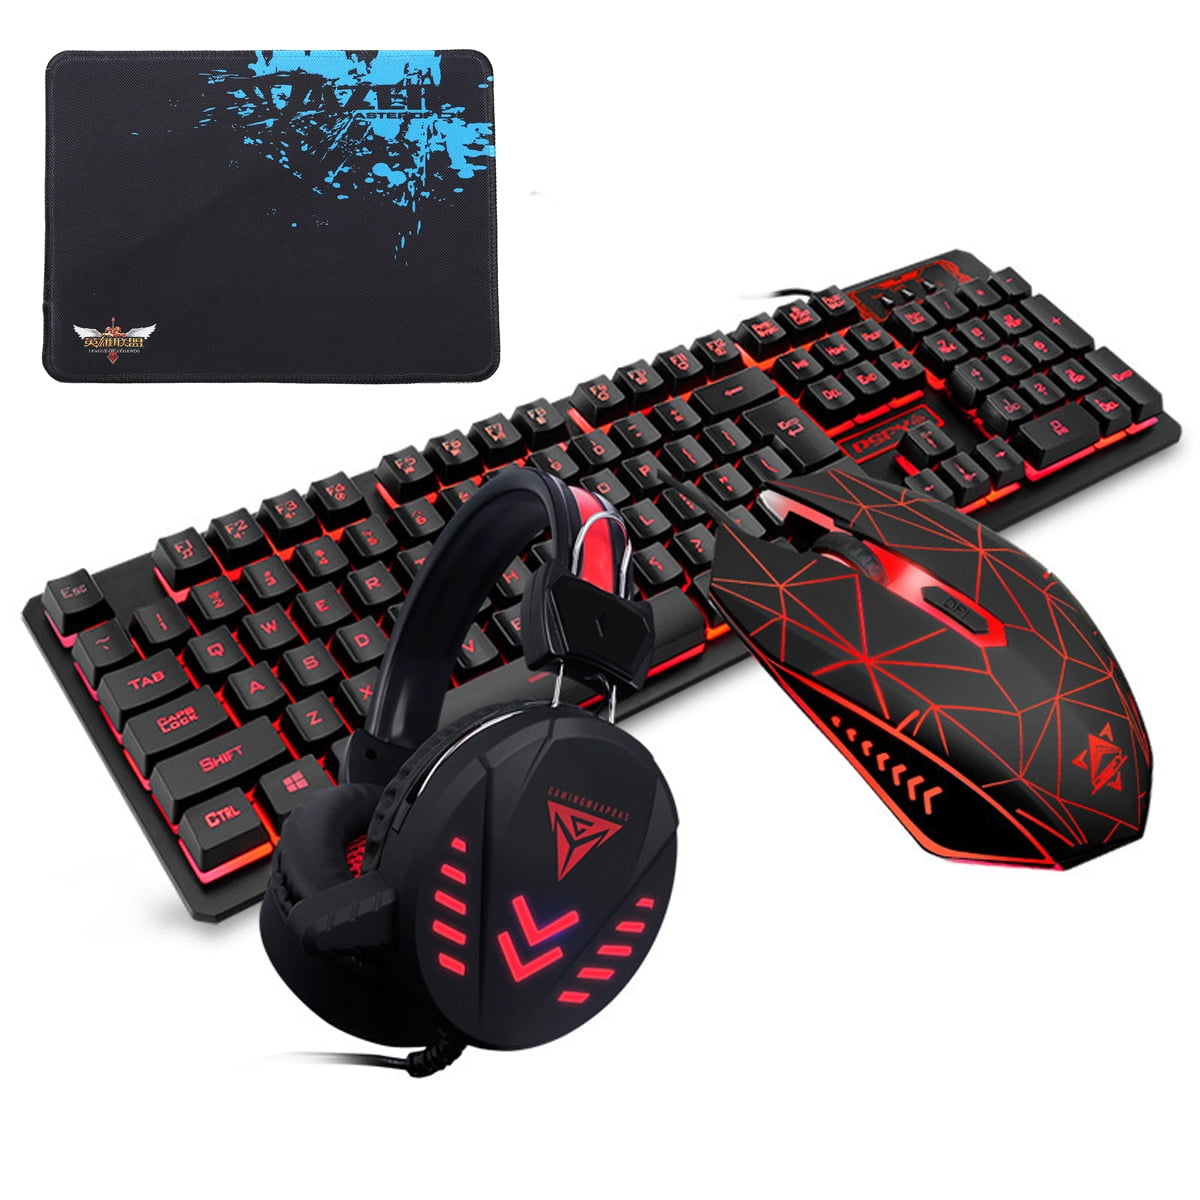 Gaming Mechanical Keyboard and Mouse Set,EDTO Switches Backlit with Gaming Mouse No Conflict Gaming USB Wired Keyboard with 9 Kinds Light 50 Million Keystrokes White 